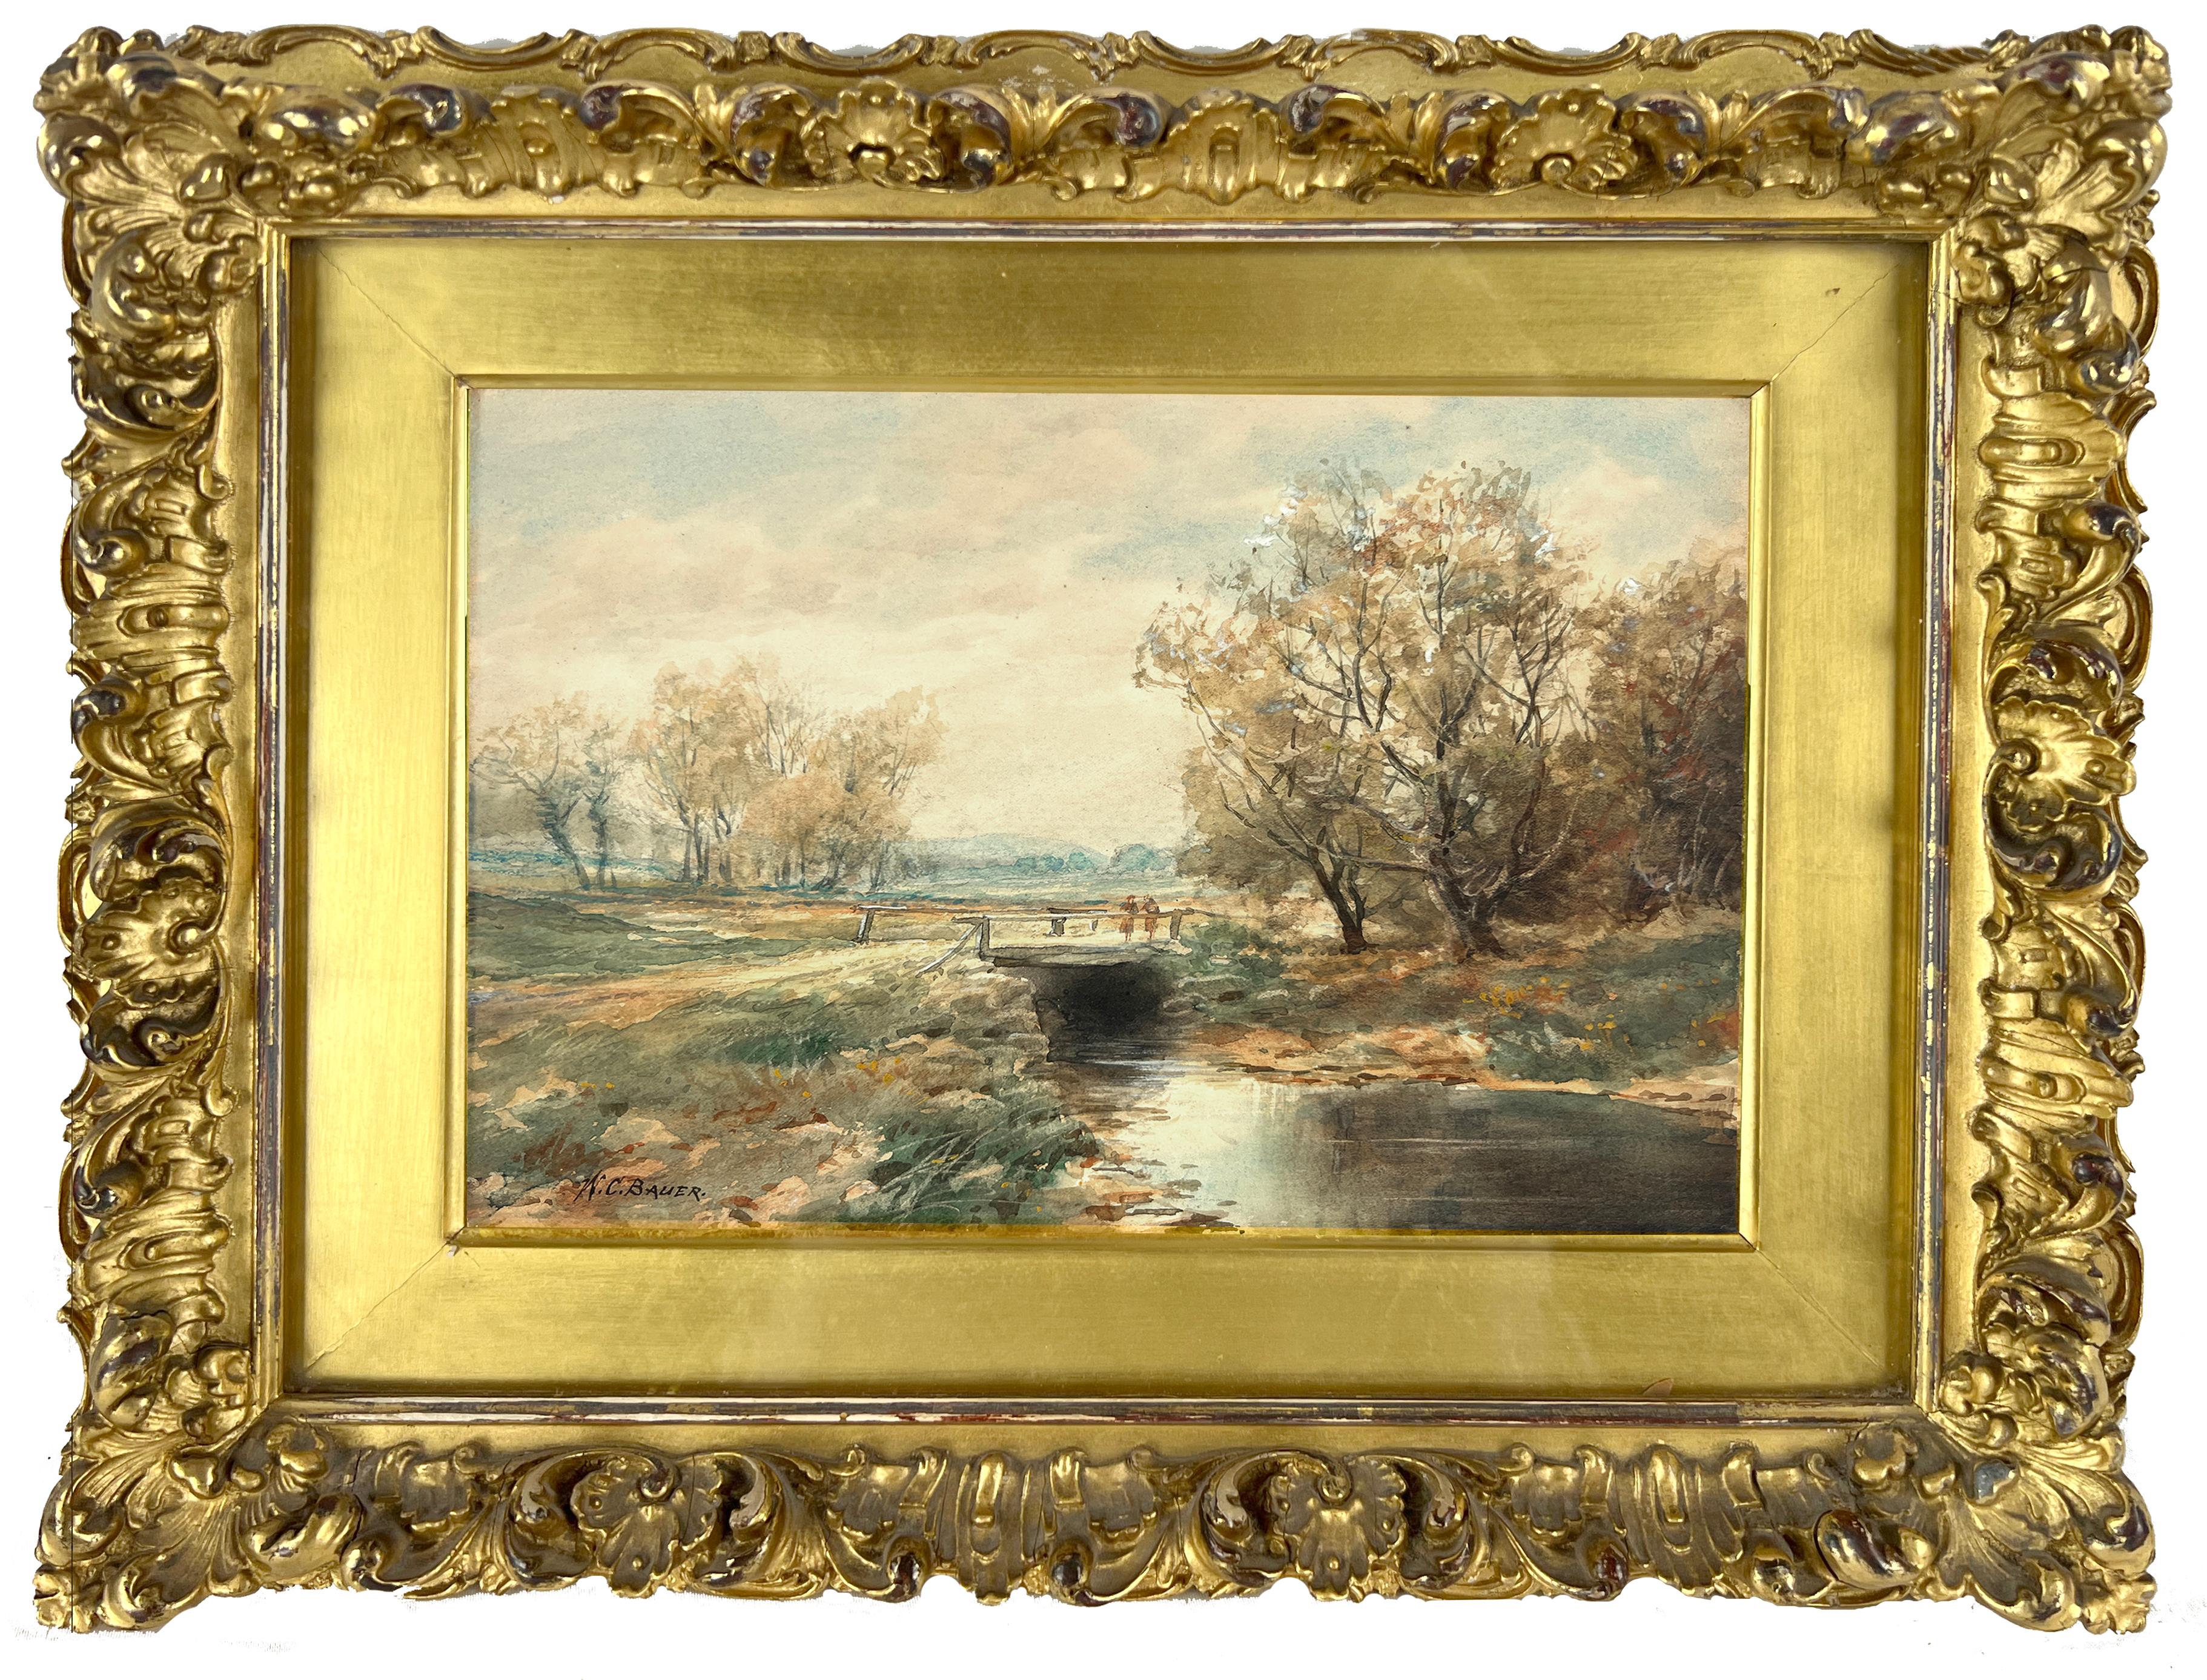 "A Shady Runlet" Stream in Fall  New Jersey Watercolor 1878